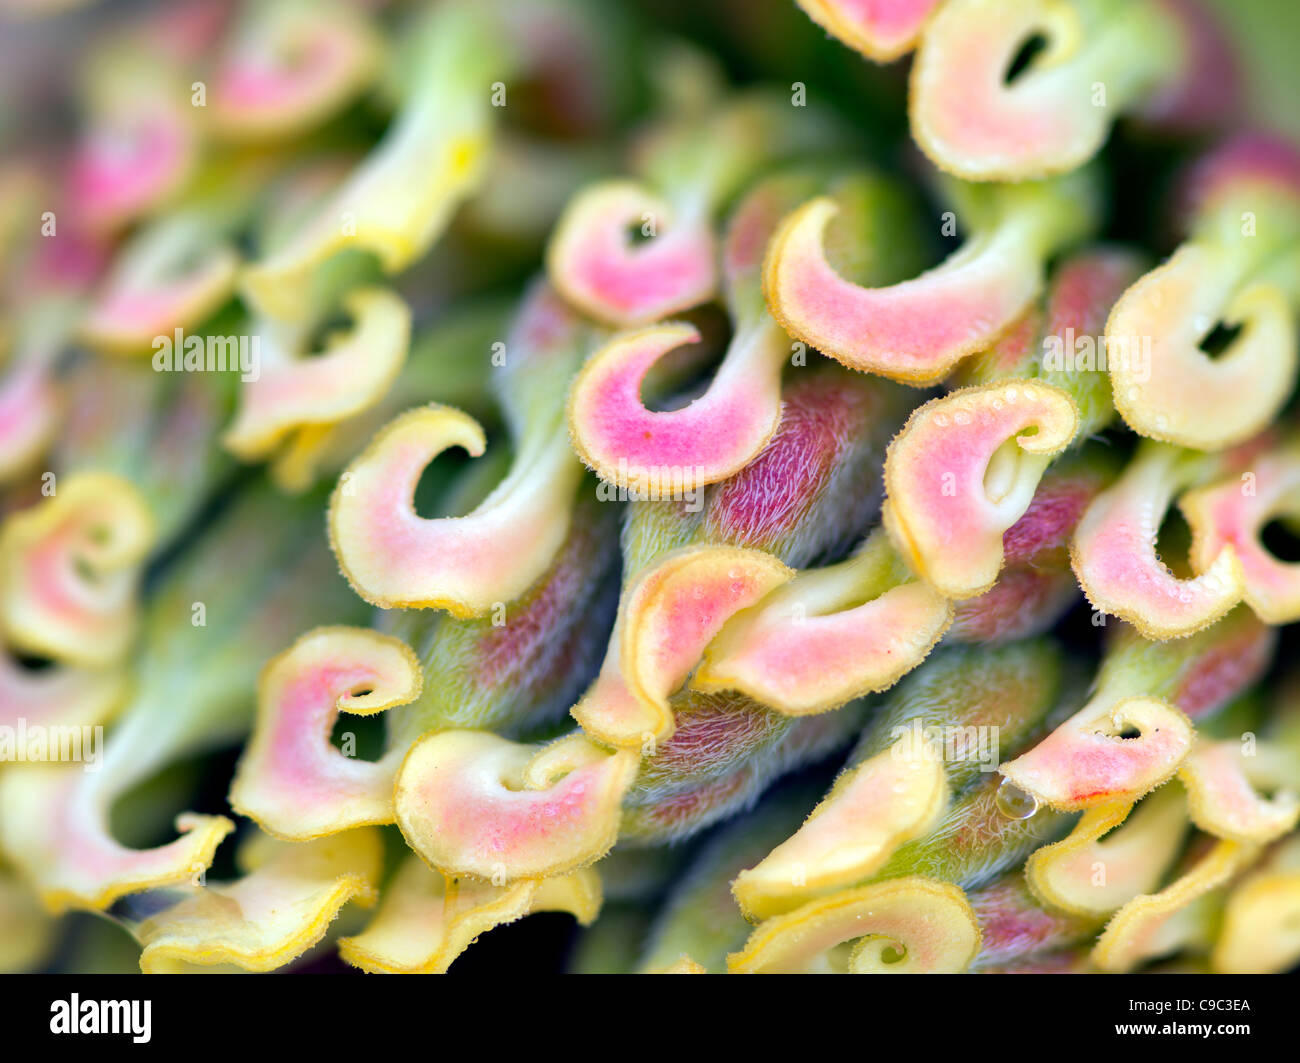 Extreme close up of Pistils from peony flower Stock Photo